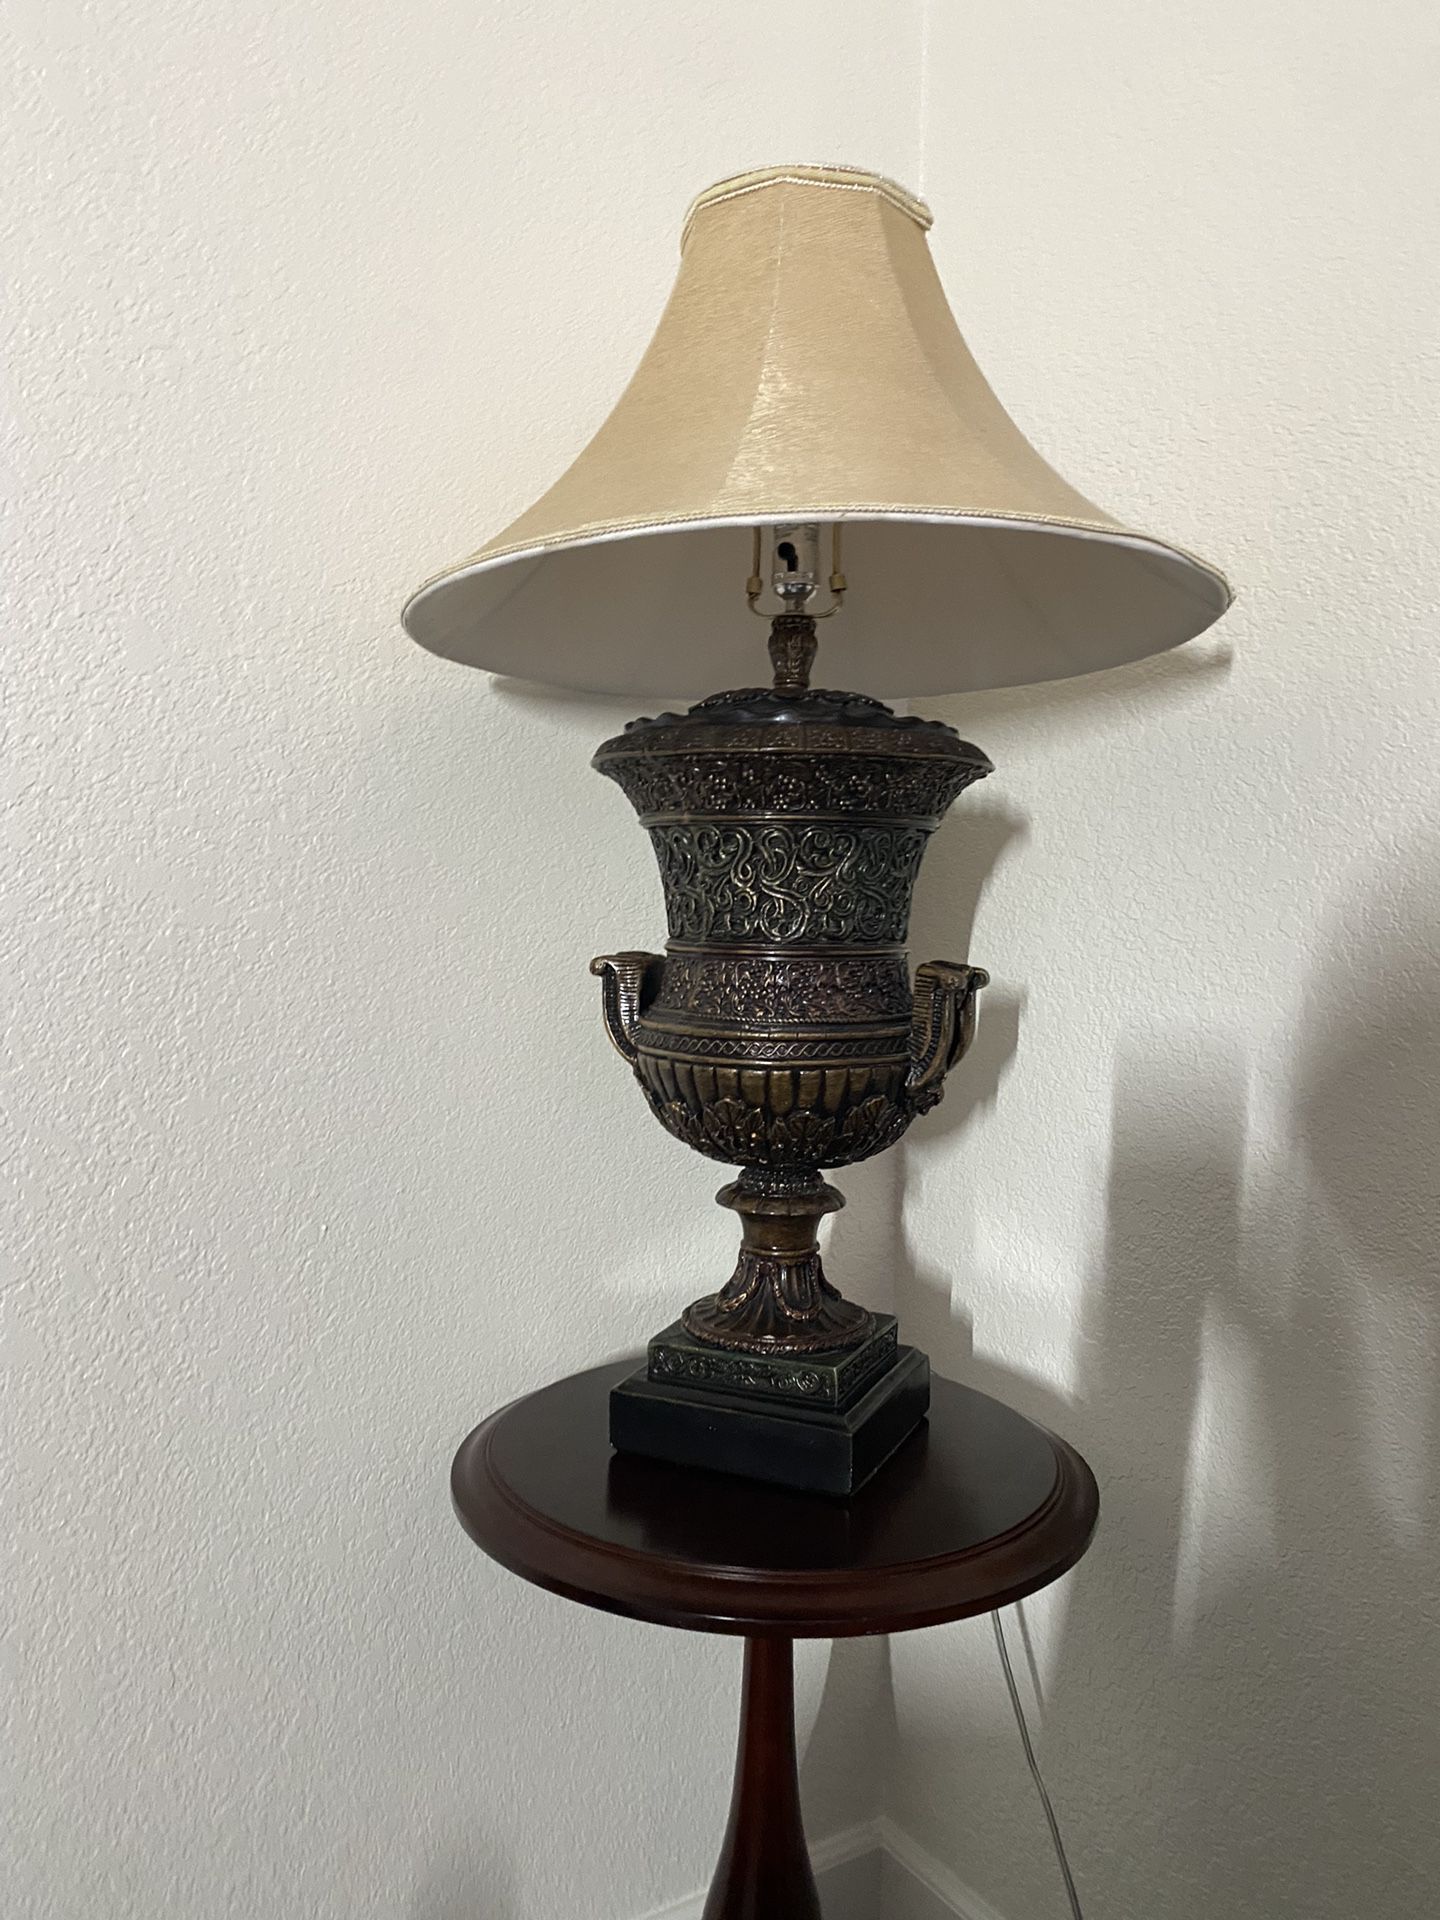 Antique Table Lamp With Carving Details